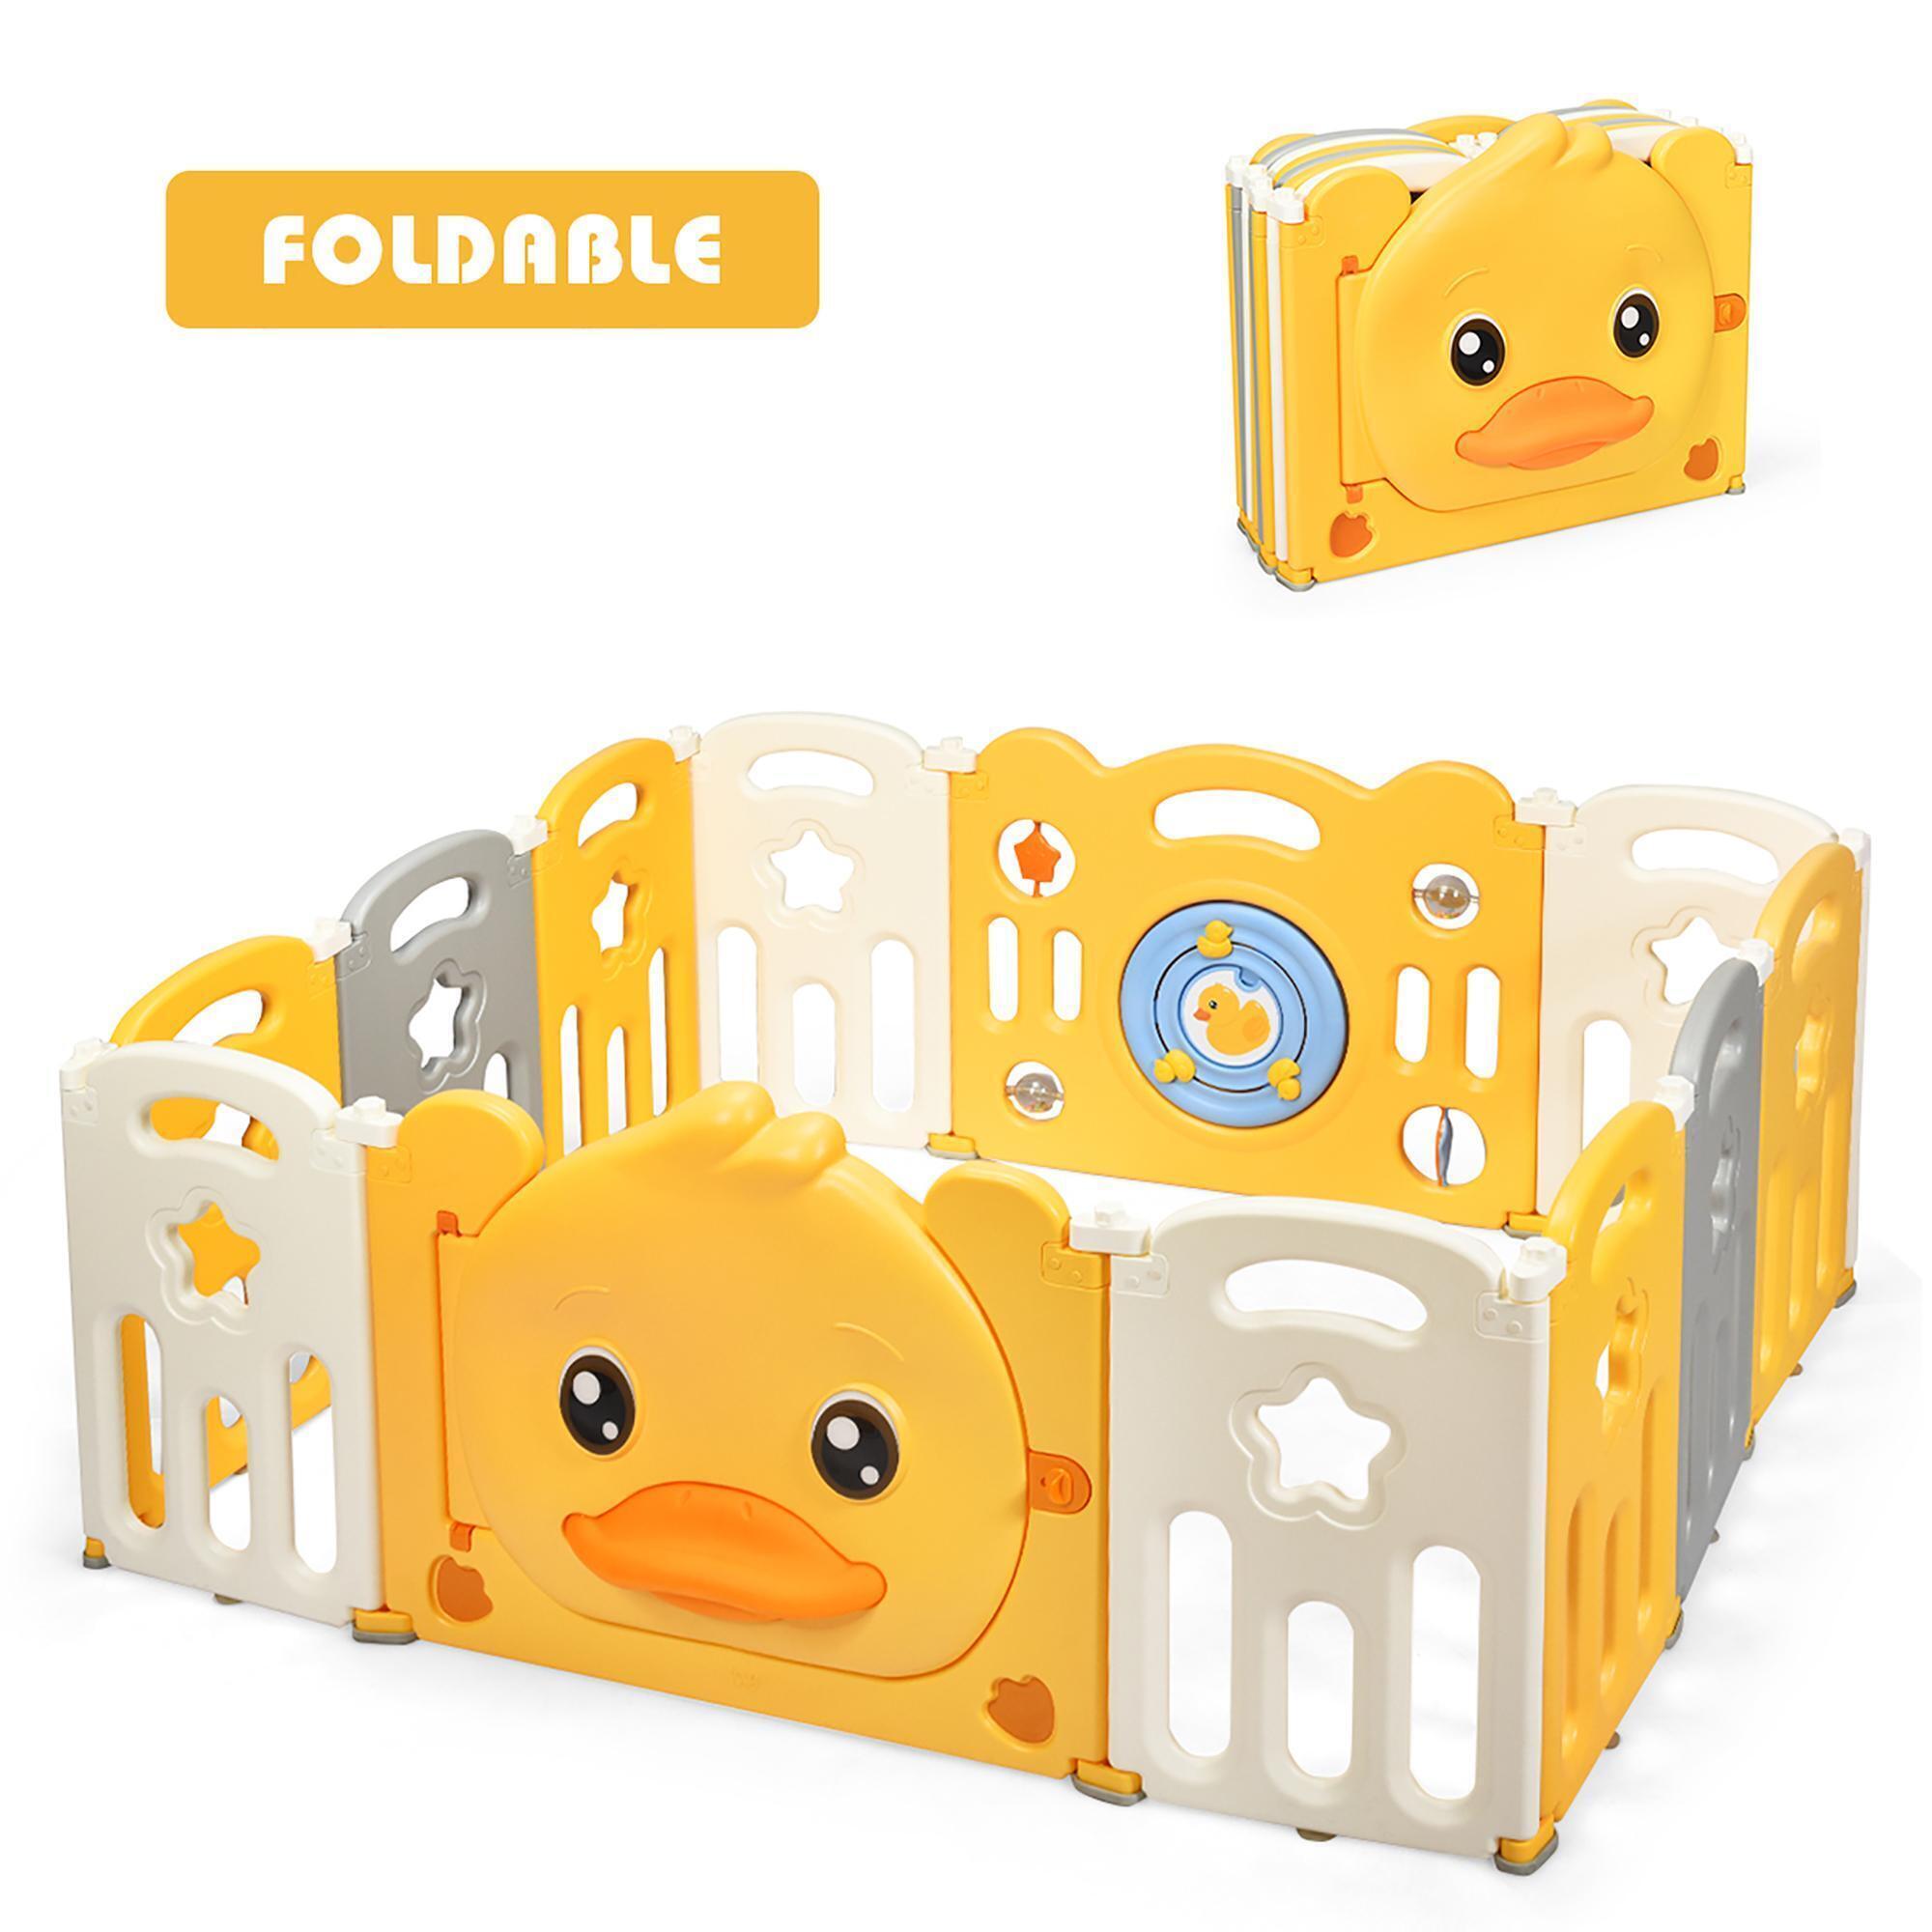 Costway 12-Panel Foldable Baby Playpen Kids Yellow Duck Yard Activity Center with Sound